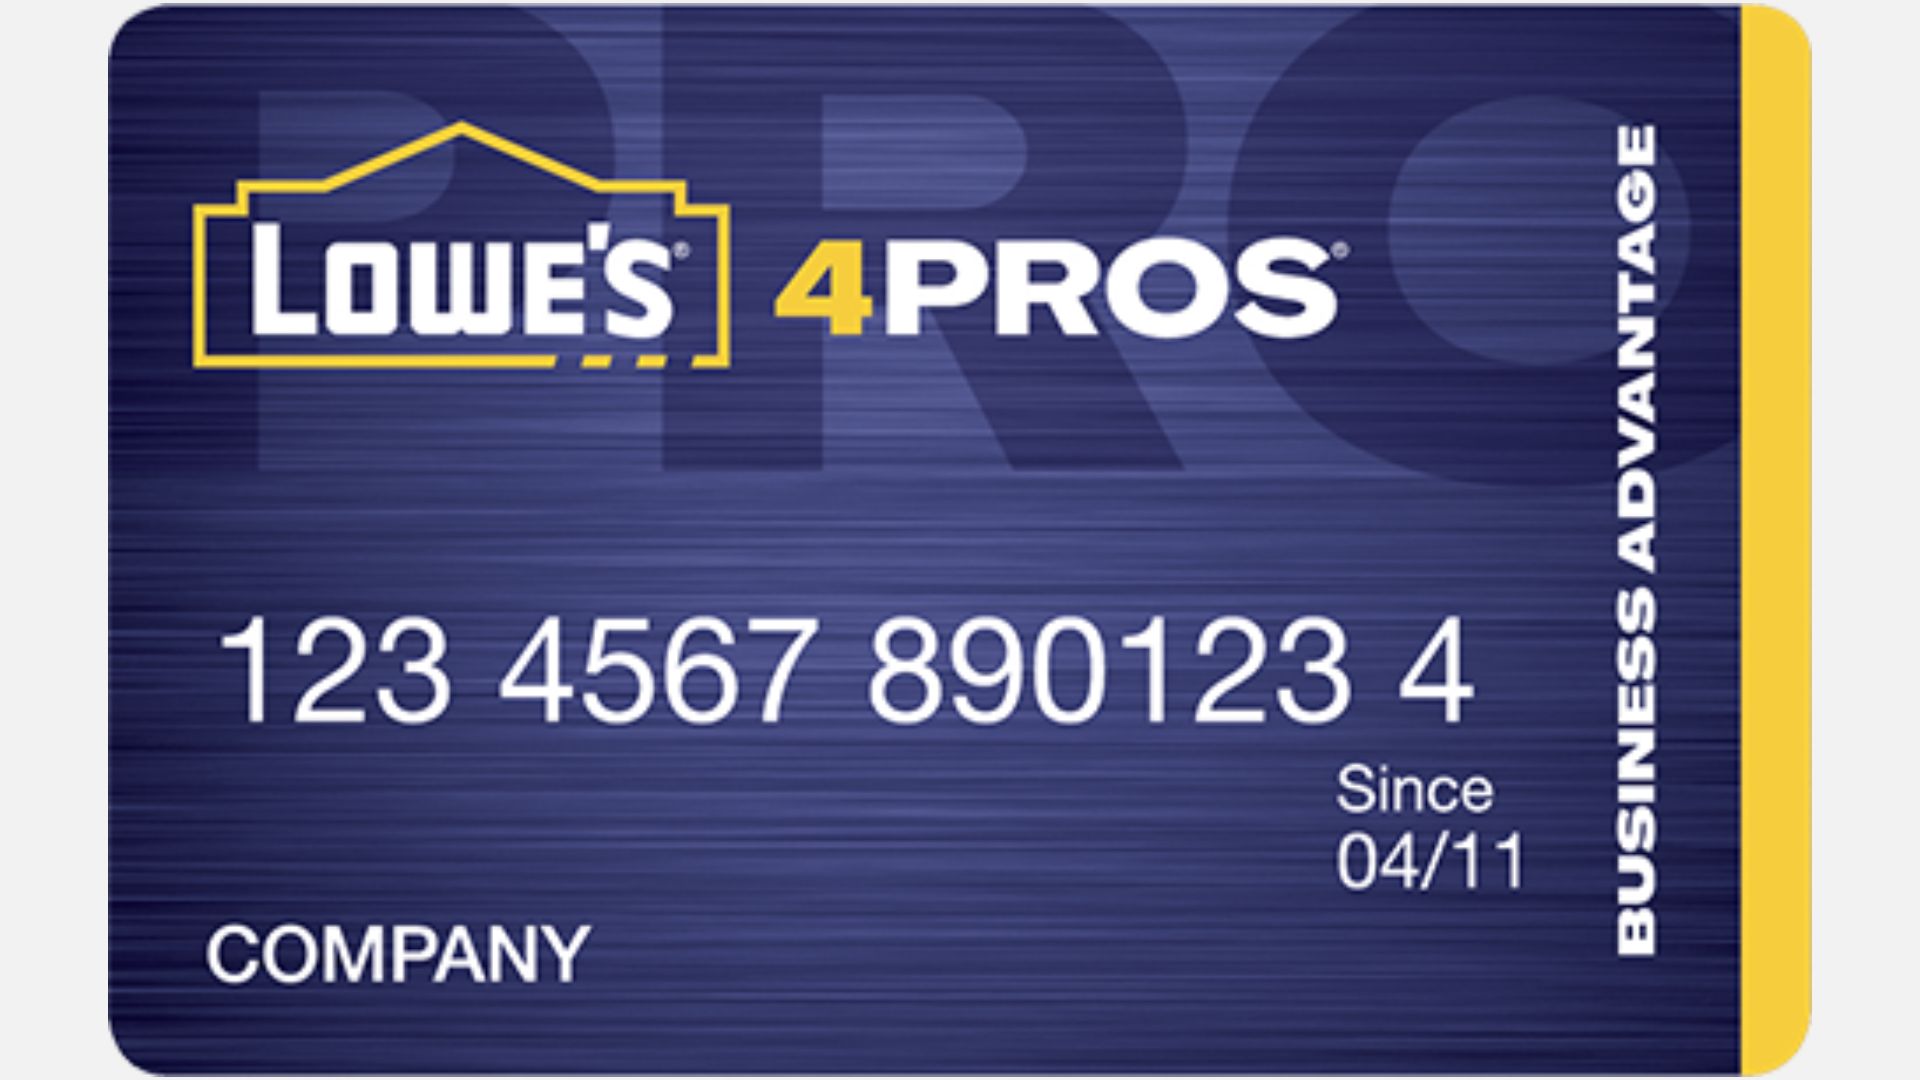 The Lowe's for Pros Credit Card: Your Business Companion